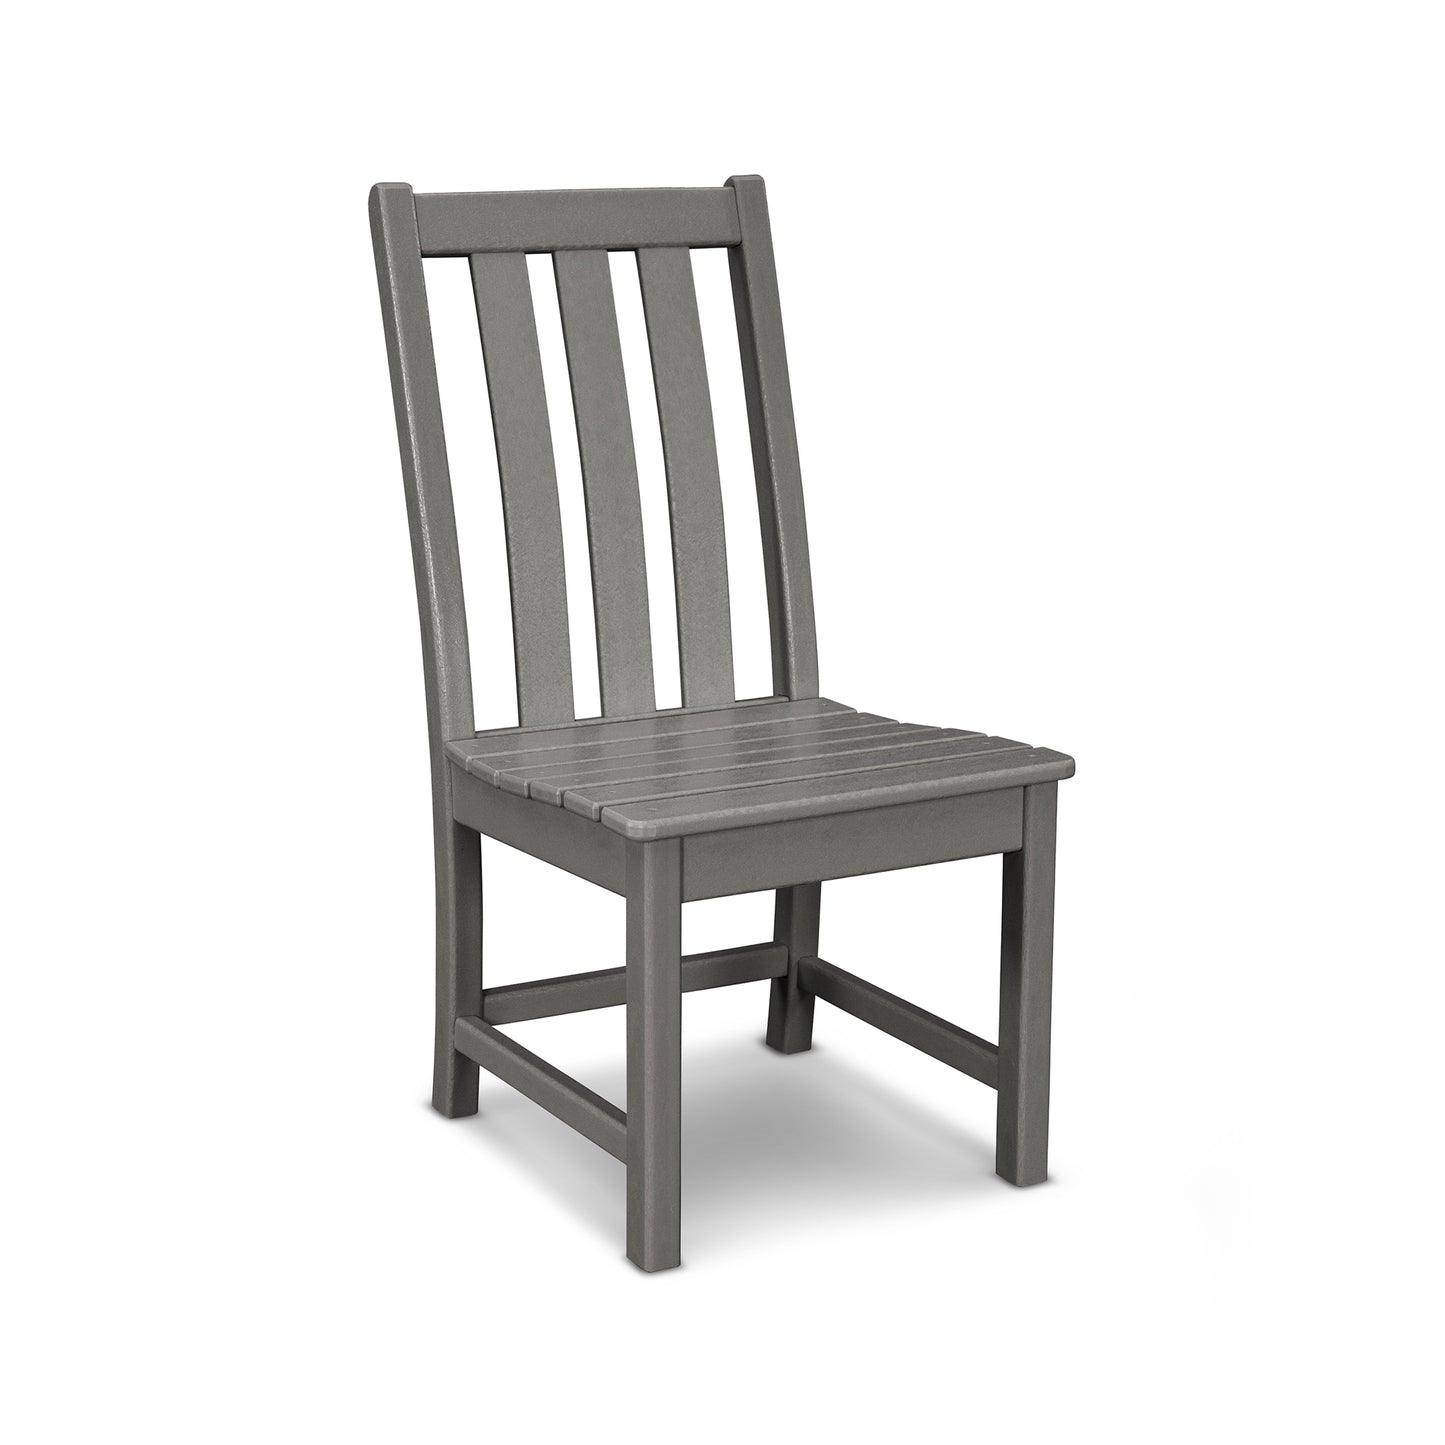 A simple gray POLYWOOD Vineyard Dining Side Chair with a straight, slatted backrest and a flat seat, isolated on a white background. The chair is made of weather-resistant POLYWOOD® material.